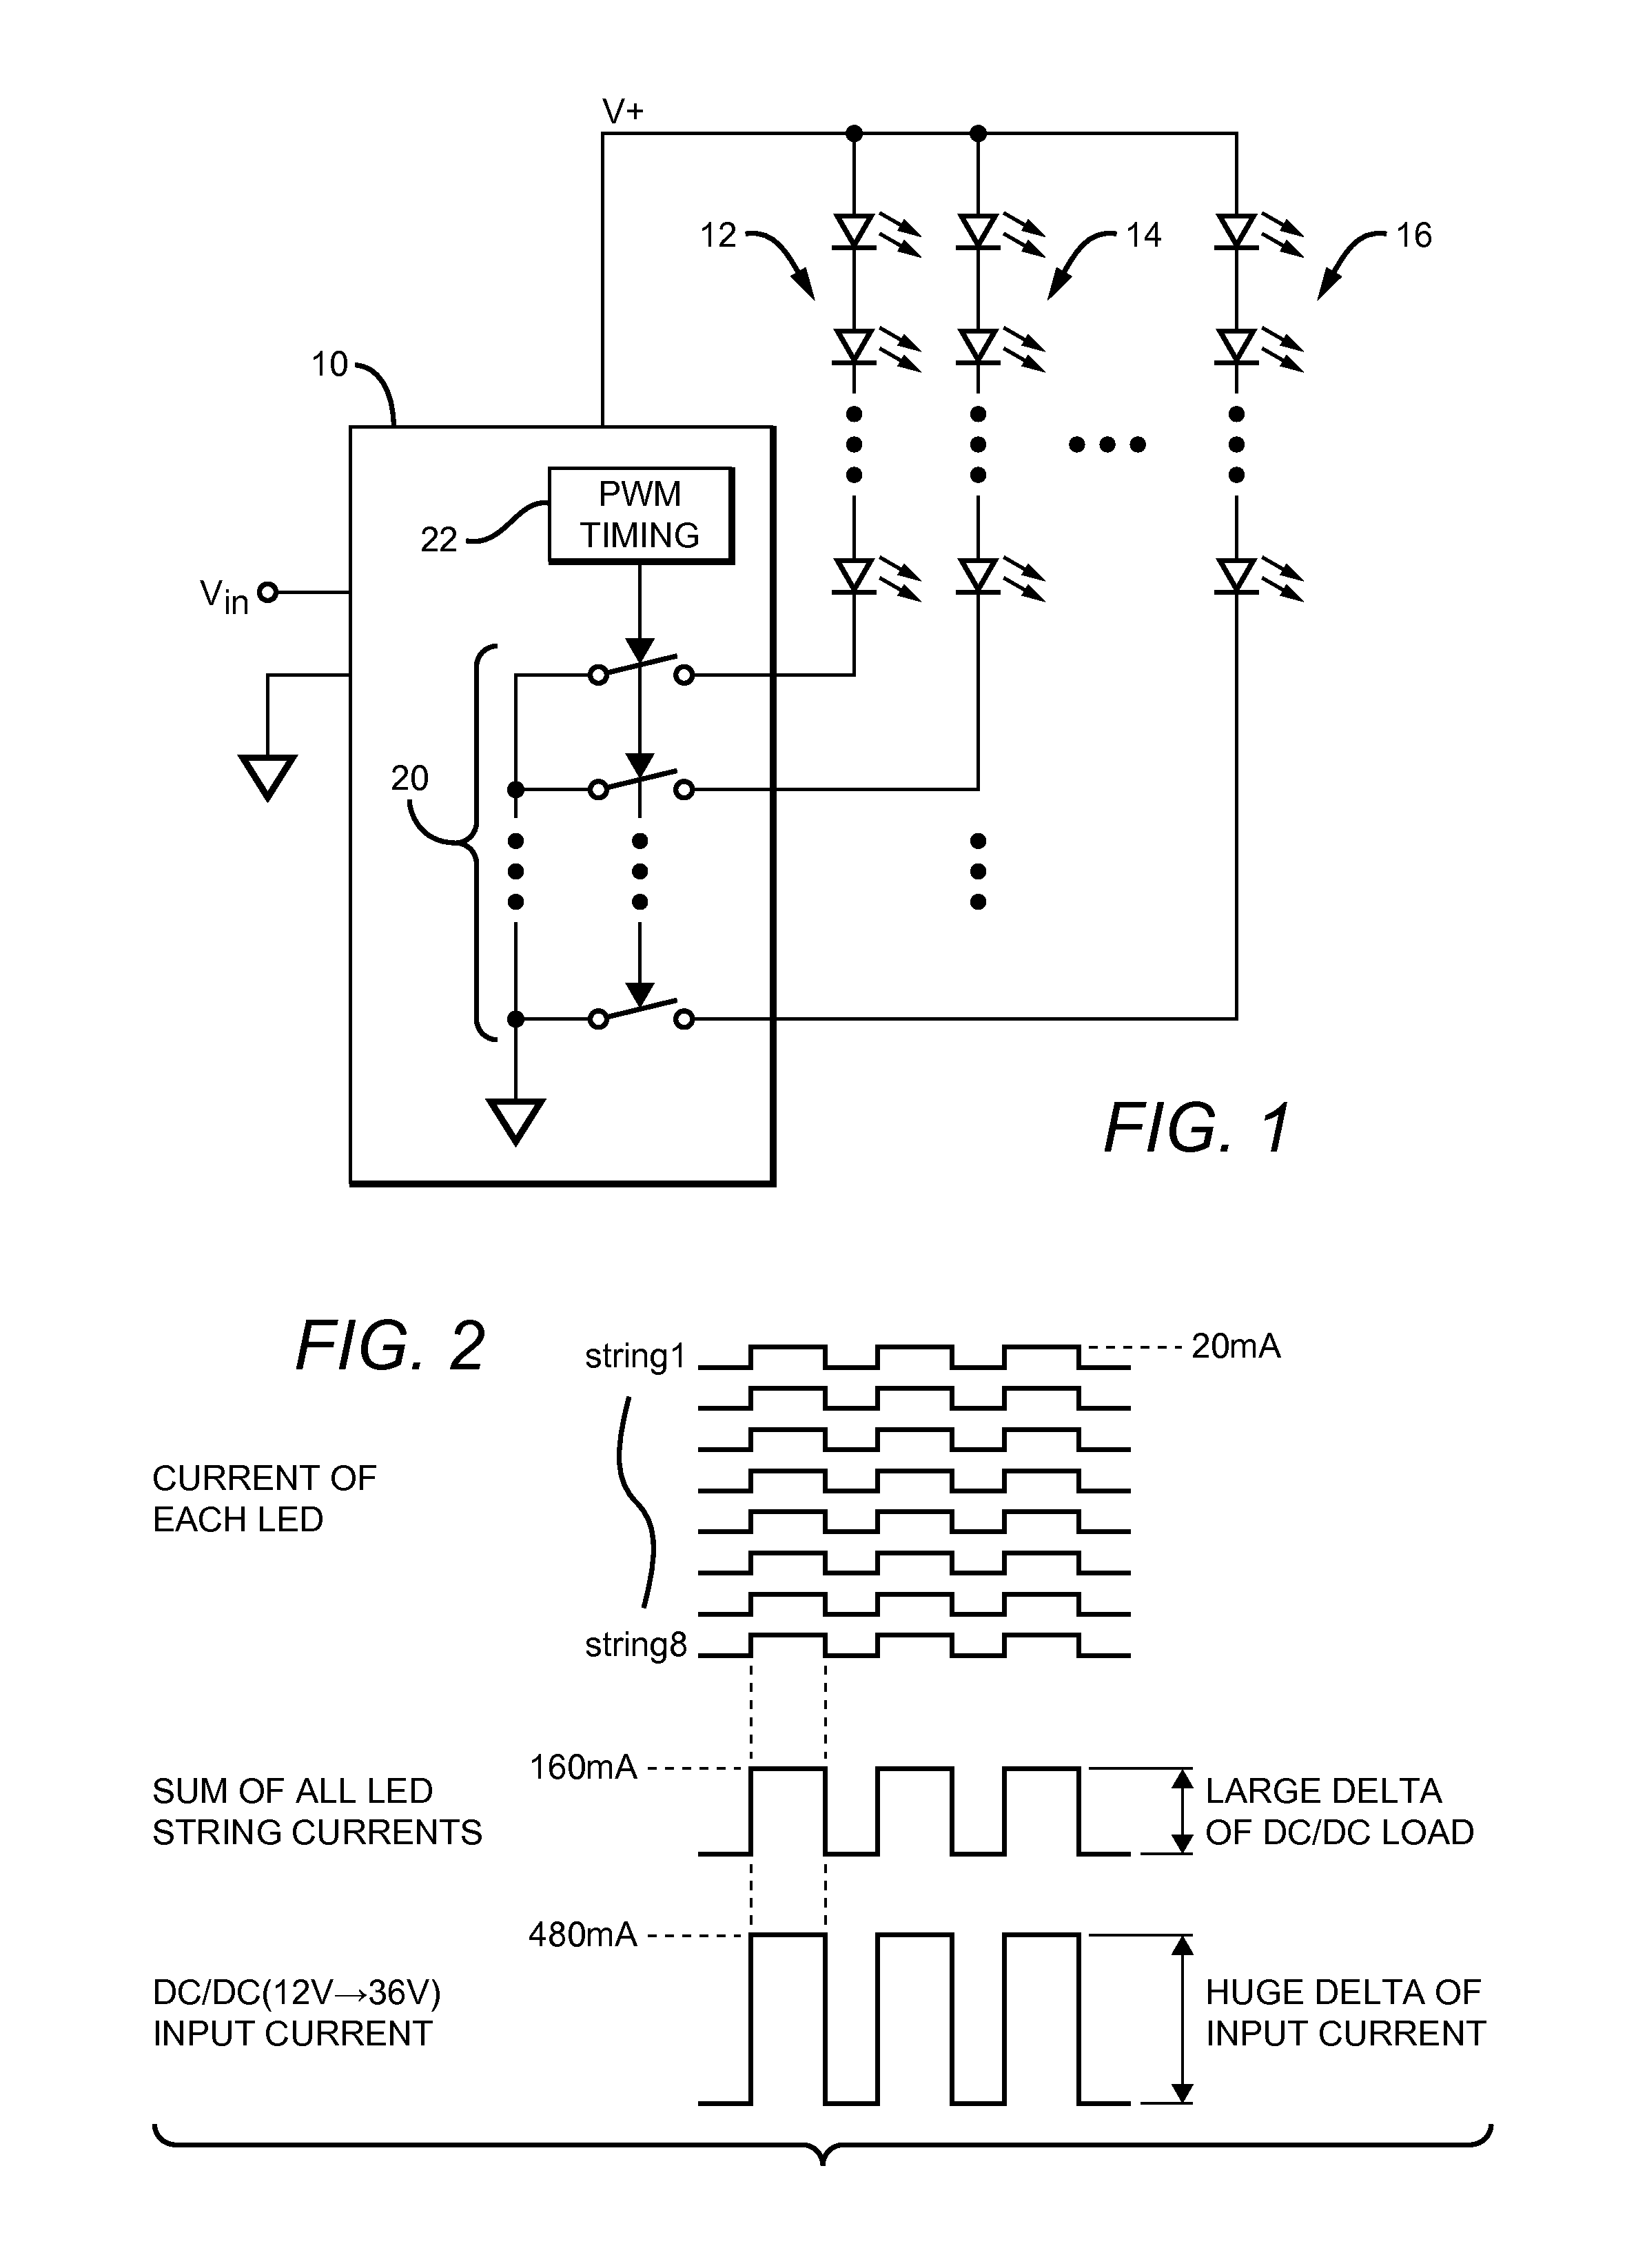 Multi-string LED driving method and system